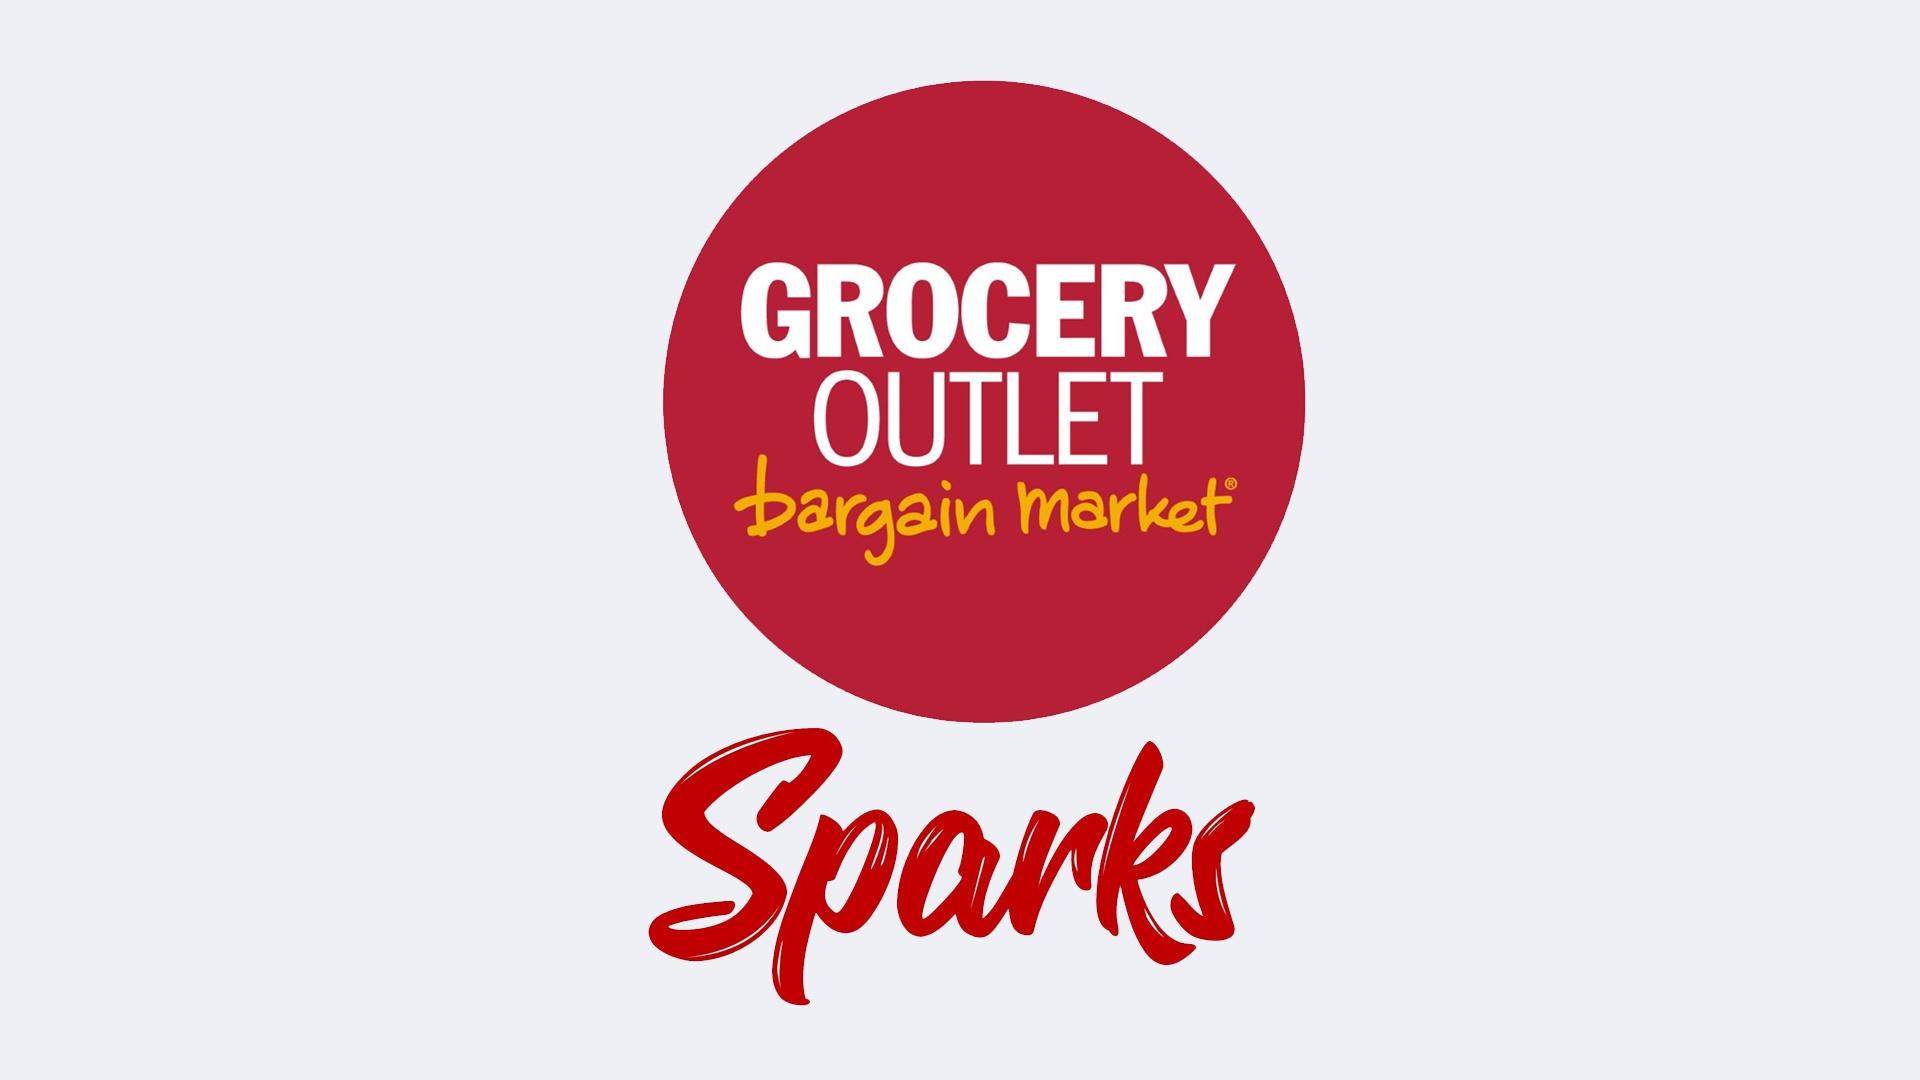 Sparks Grocery Outlet